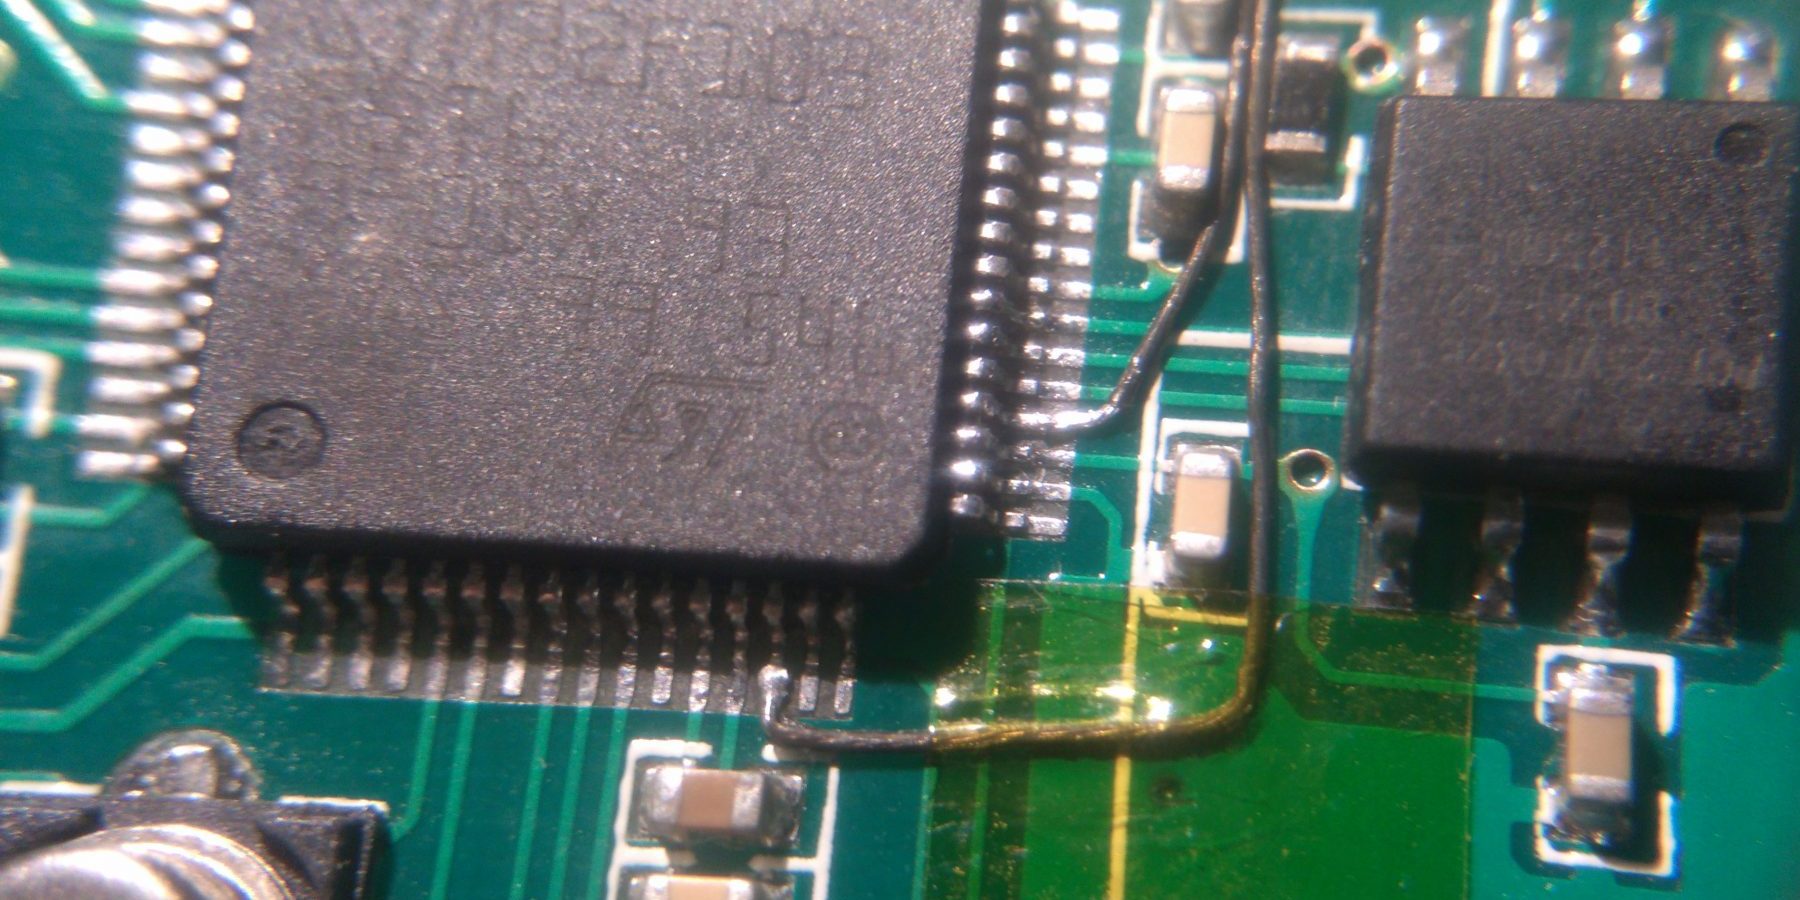 Both pins after wires are soldered onto them.